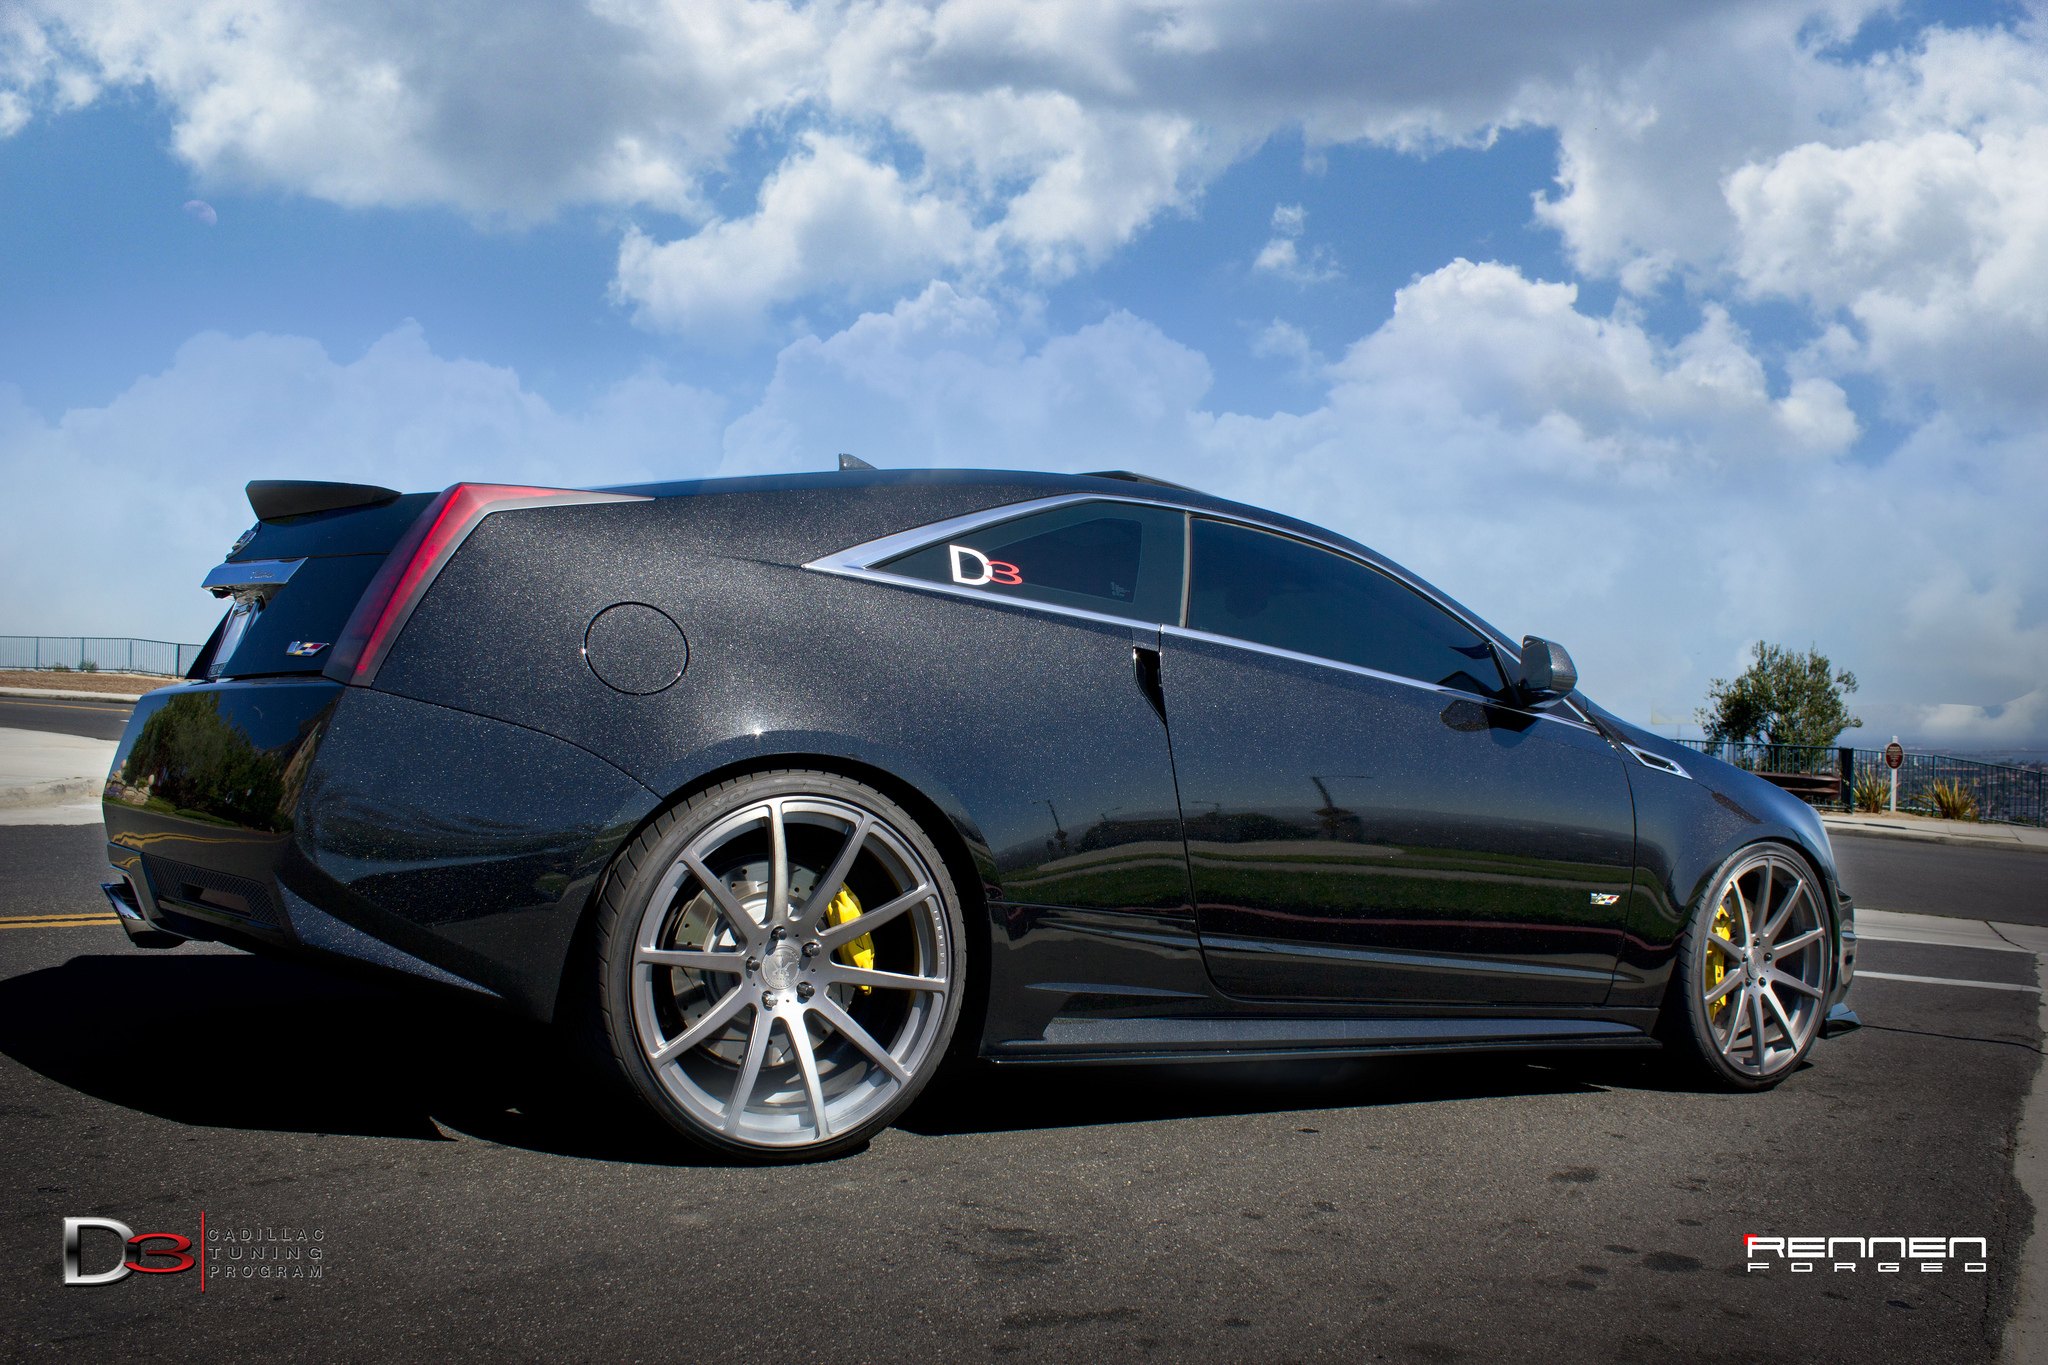 Chrome Forged Rennen Rims on Gray Cadillac CTS - Photo by Rennen International